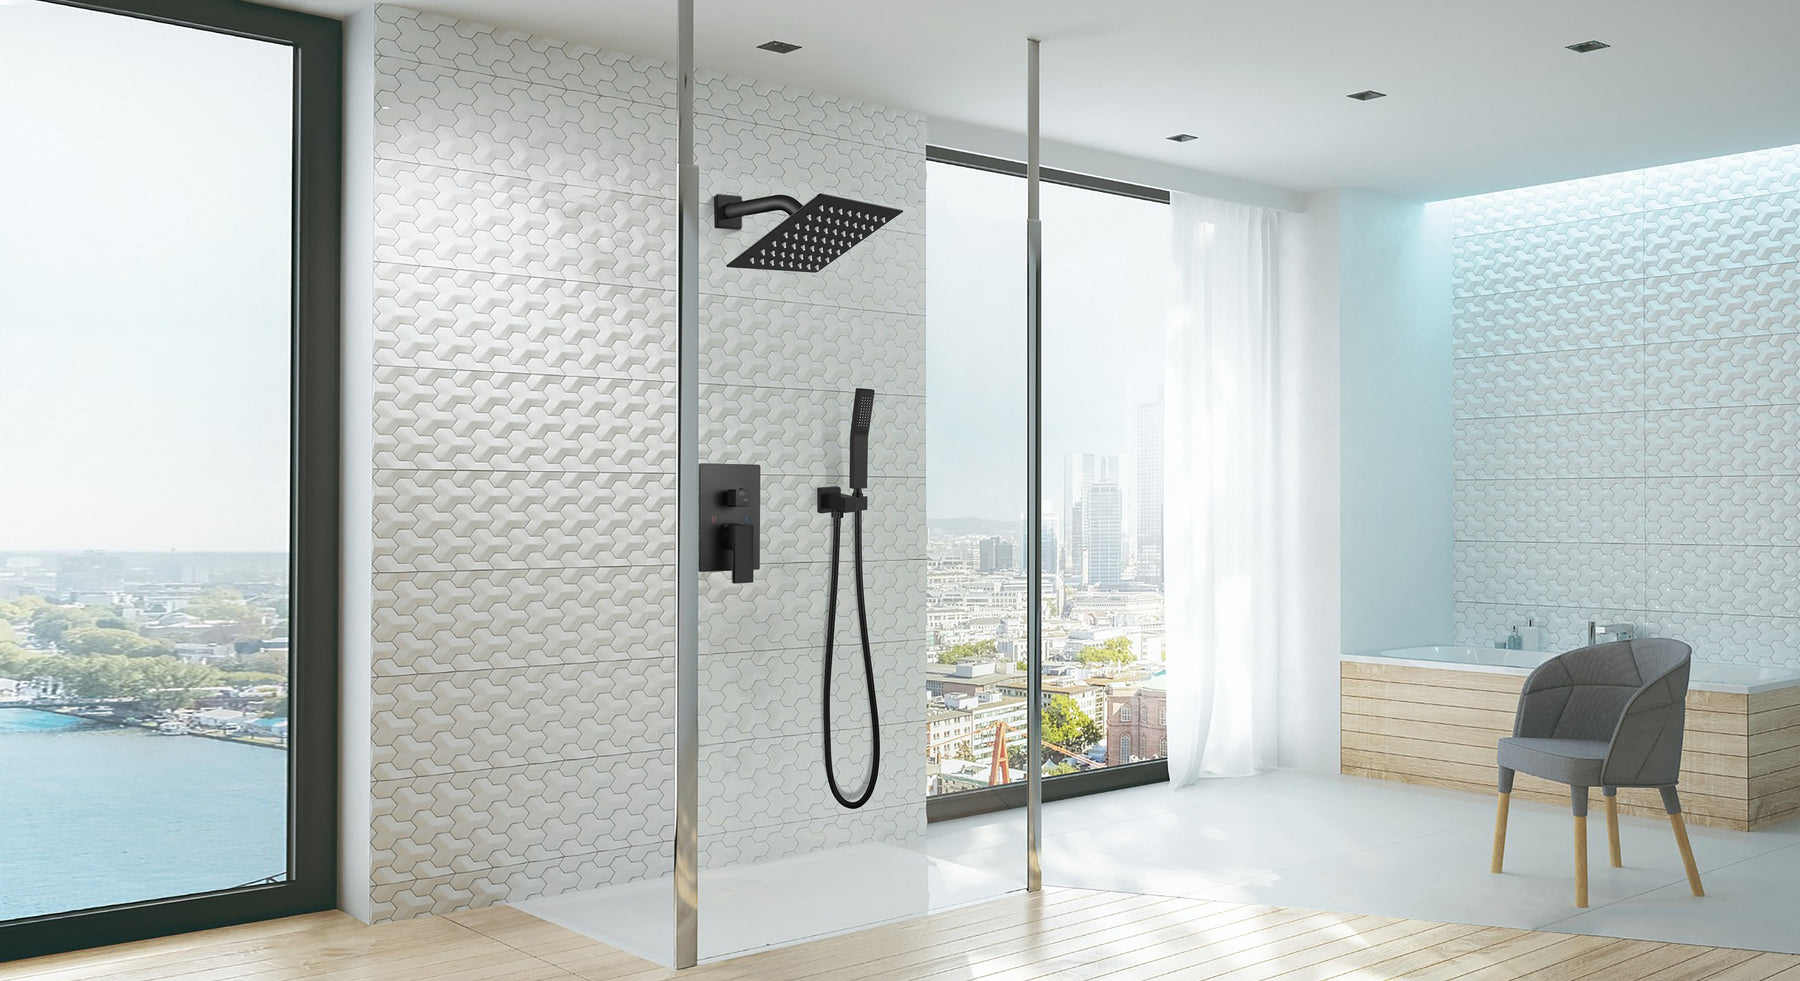 gotonovo Matt Black Shower System Bathroom Shower Faucet Set Wall Mounted 8 Inch Square Rainfall Shower Head 2-Function Single Handle and Hand Held Spray with Rough-in Valve and Shower Trim Included